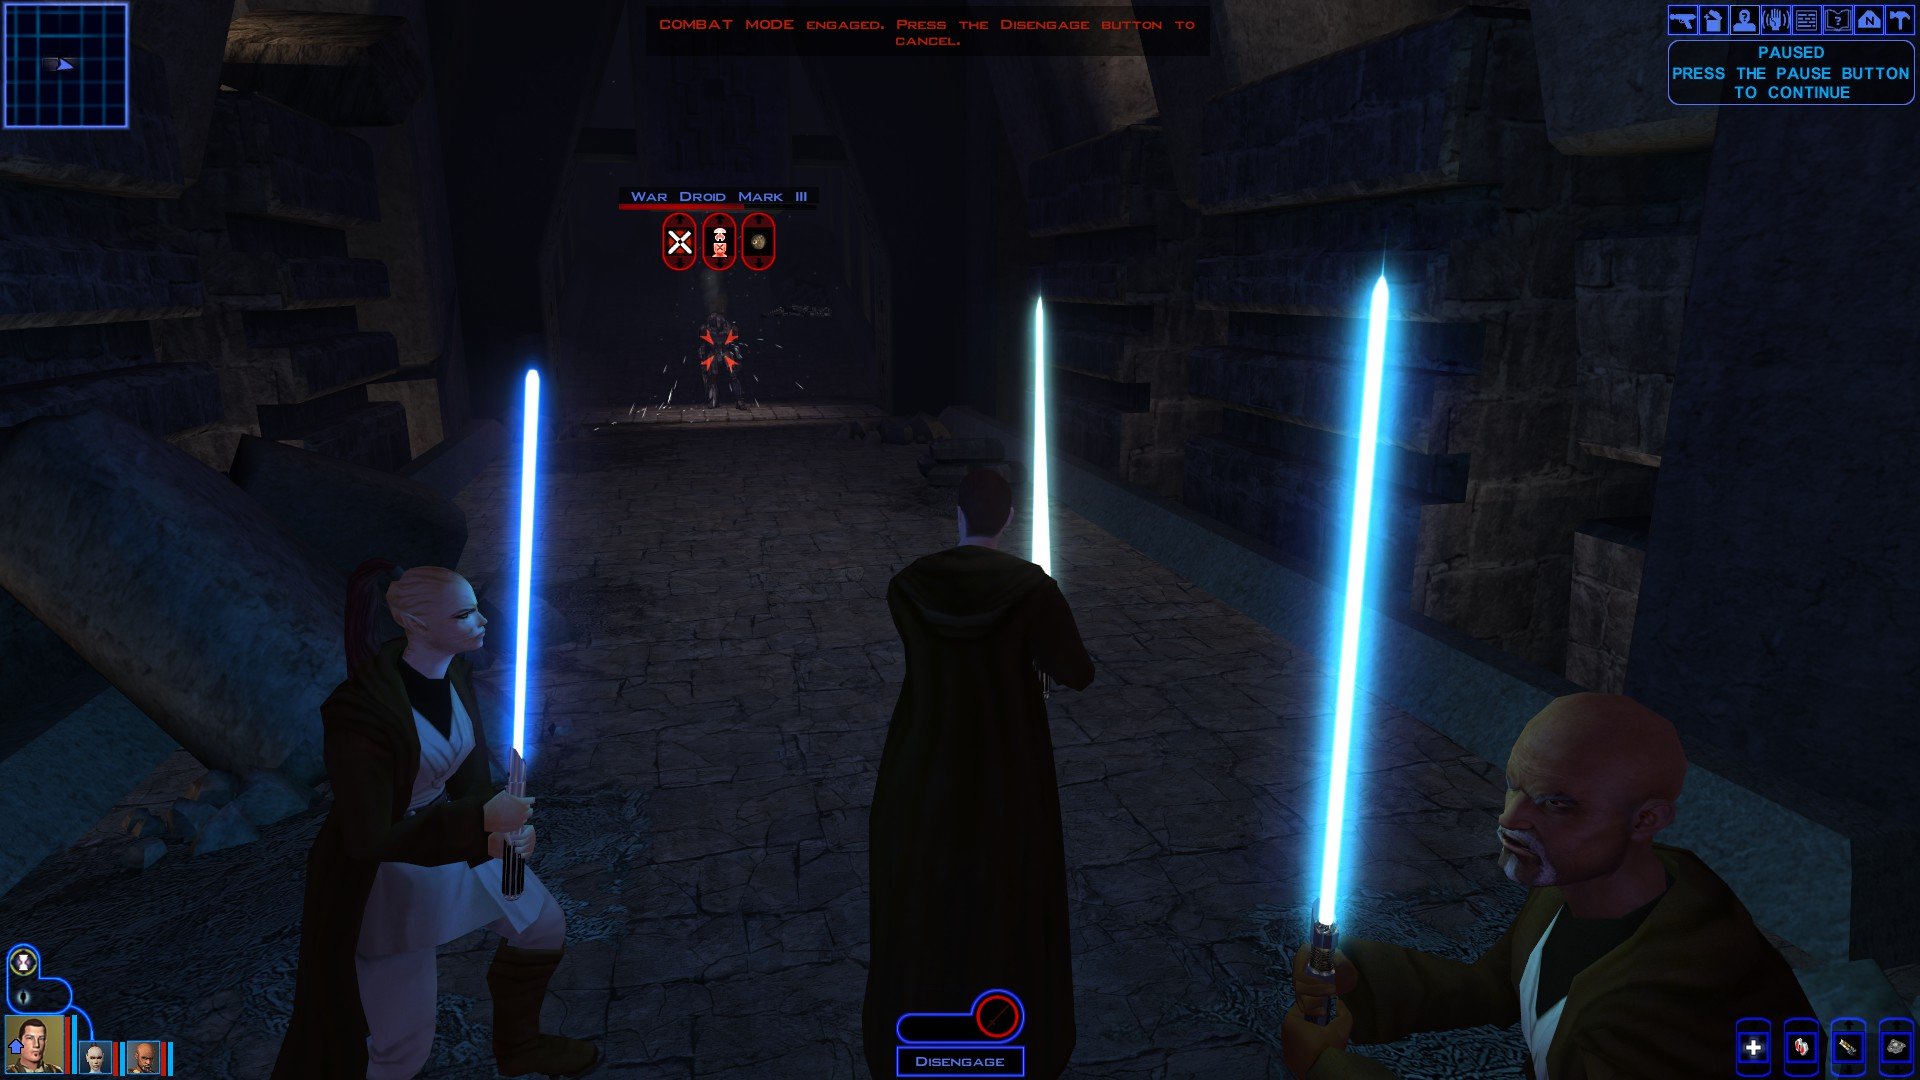 Battlefront 2 (2005) mods for beginners. All mods will be linked in the  comments. : r/StarWarsBattlefront